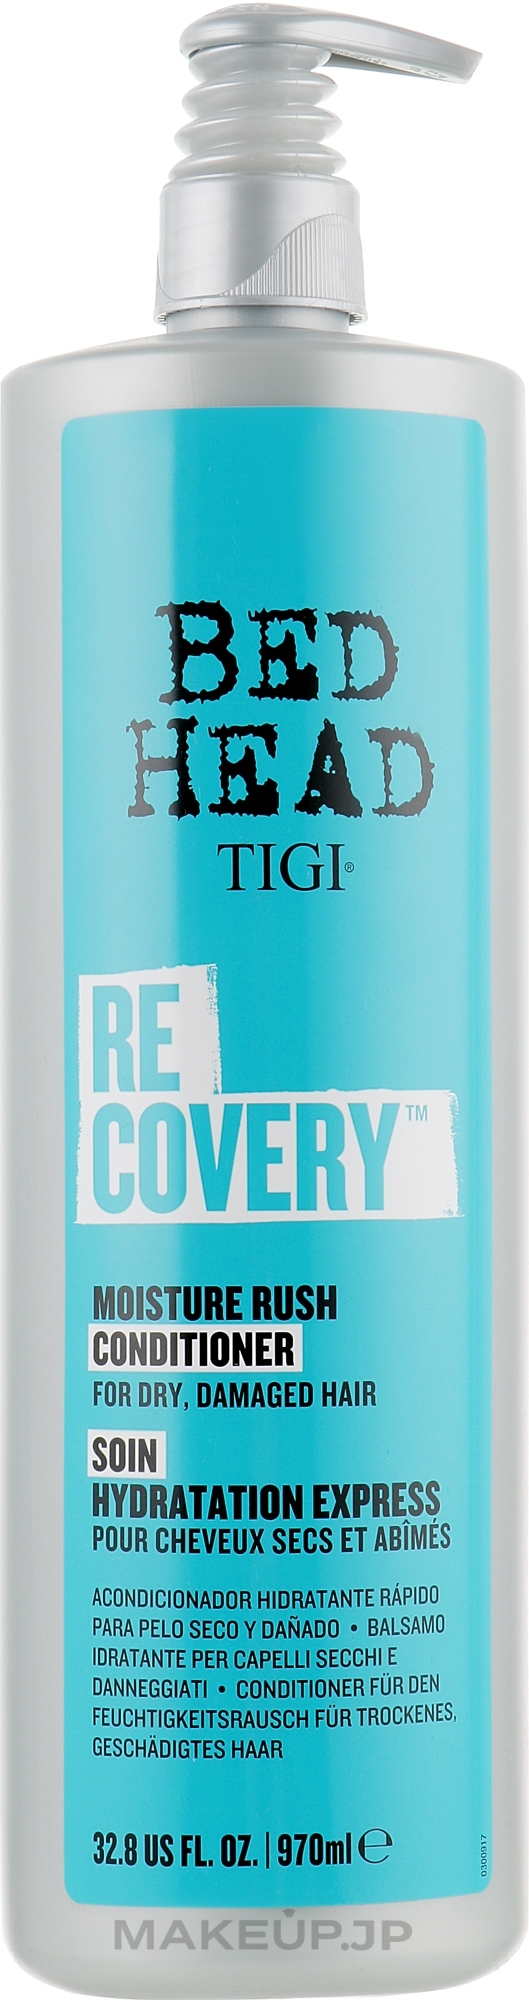 Conditioner for Dry & Damaged Hair - Tigi Bed Head Recovery Moisture Rush Conditioner — photo 970 ml